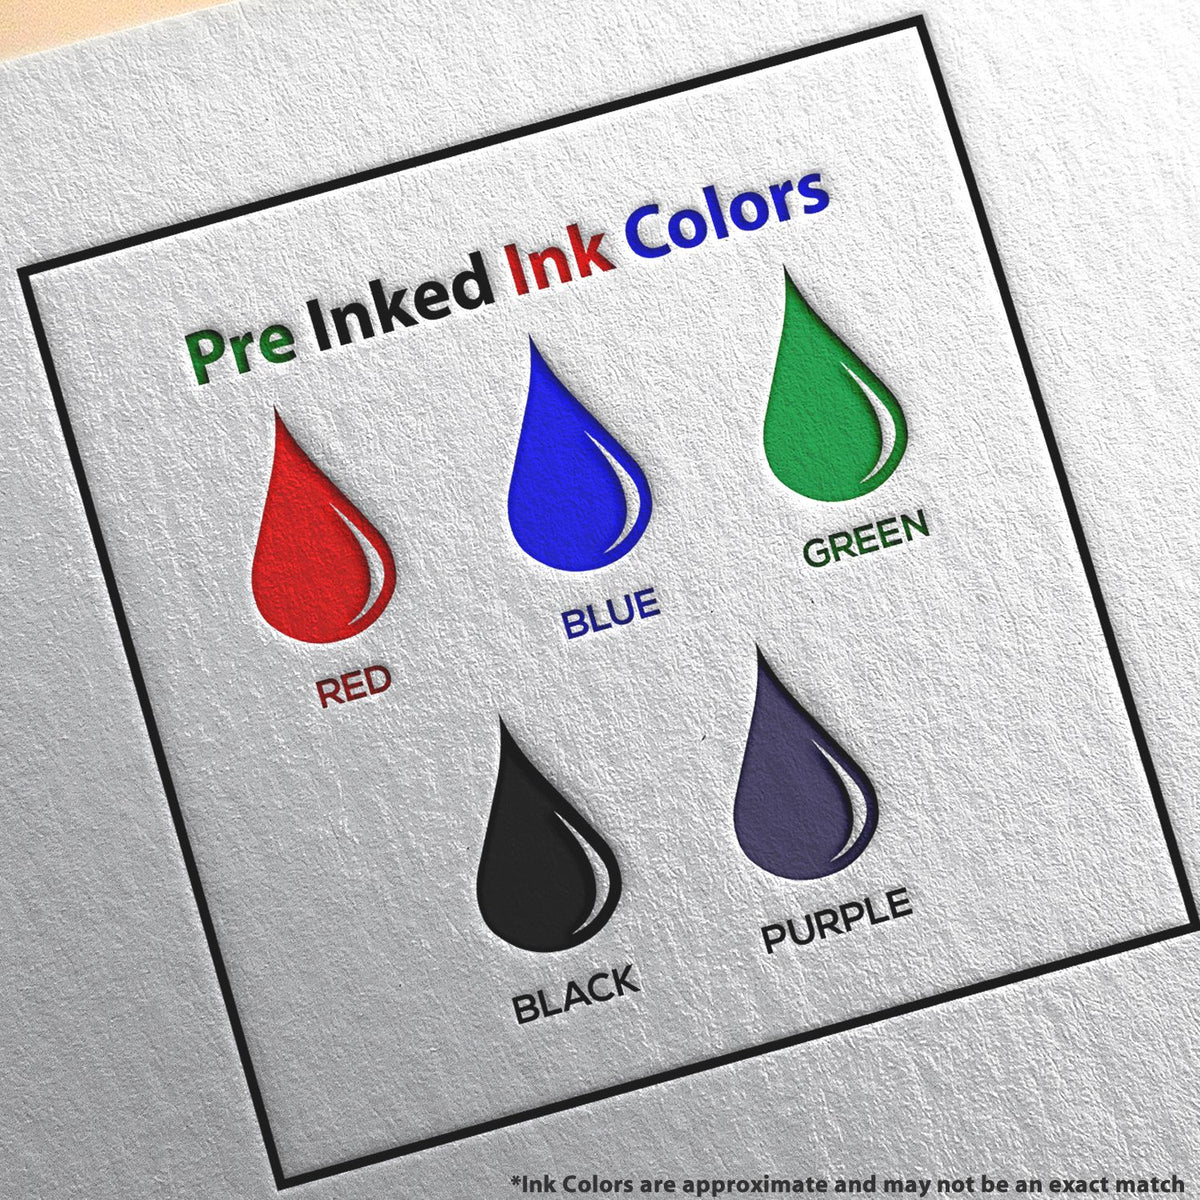 A picture showing the different ink colors or hues available for the PSI California Notary Stamp product.